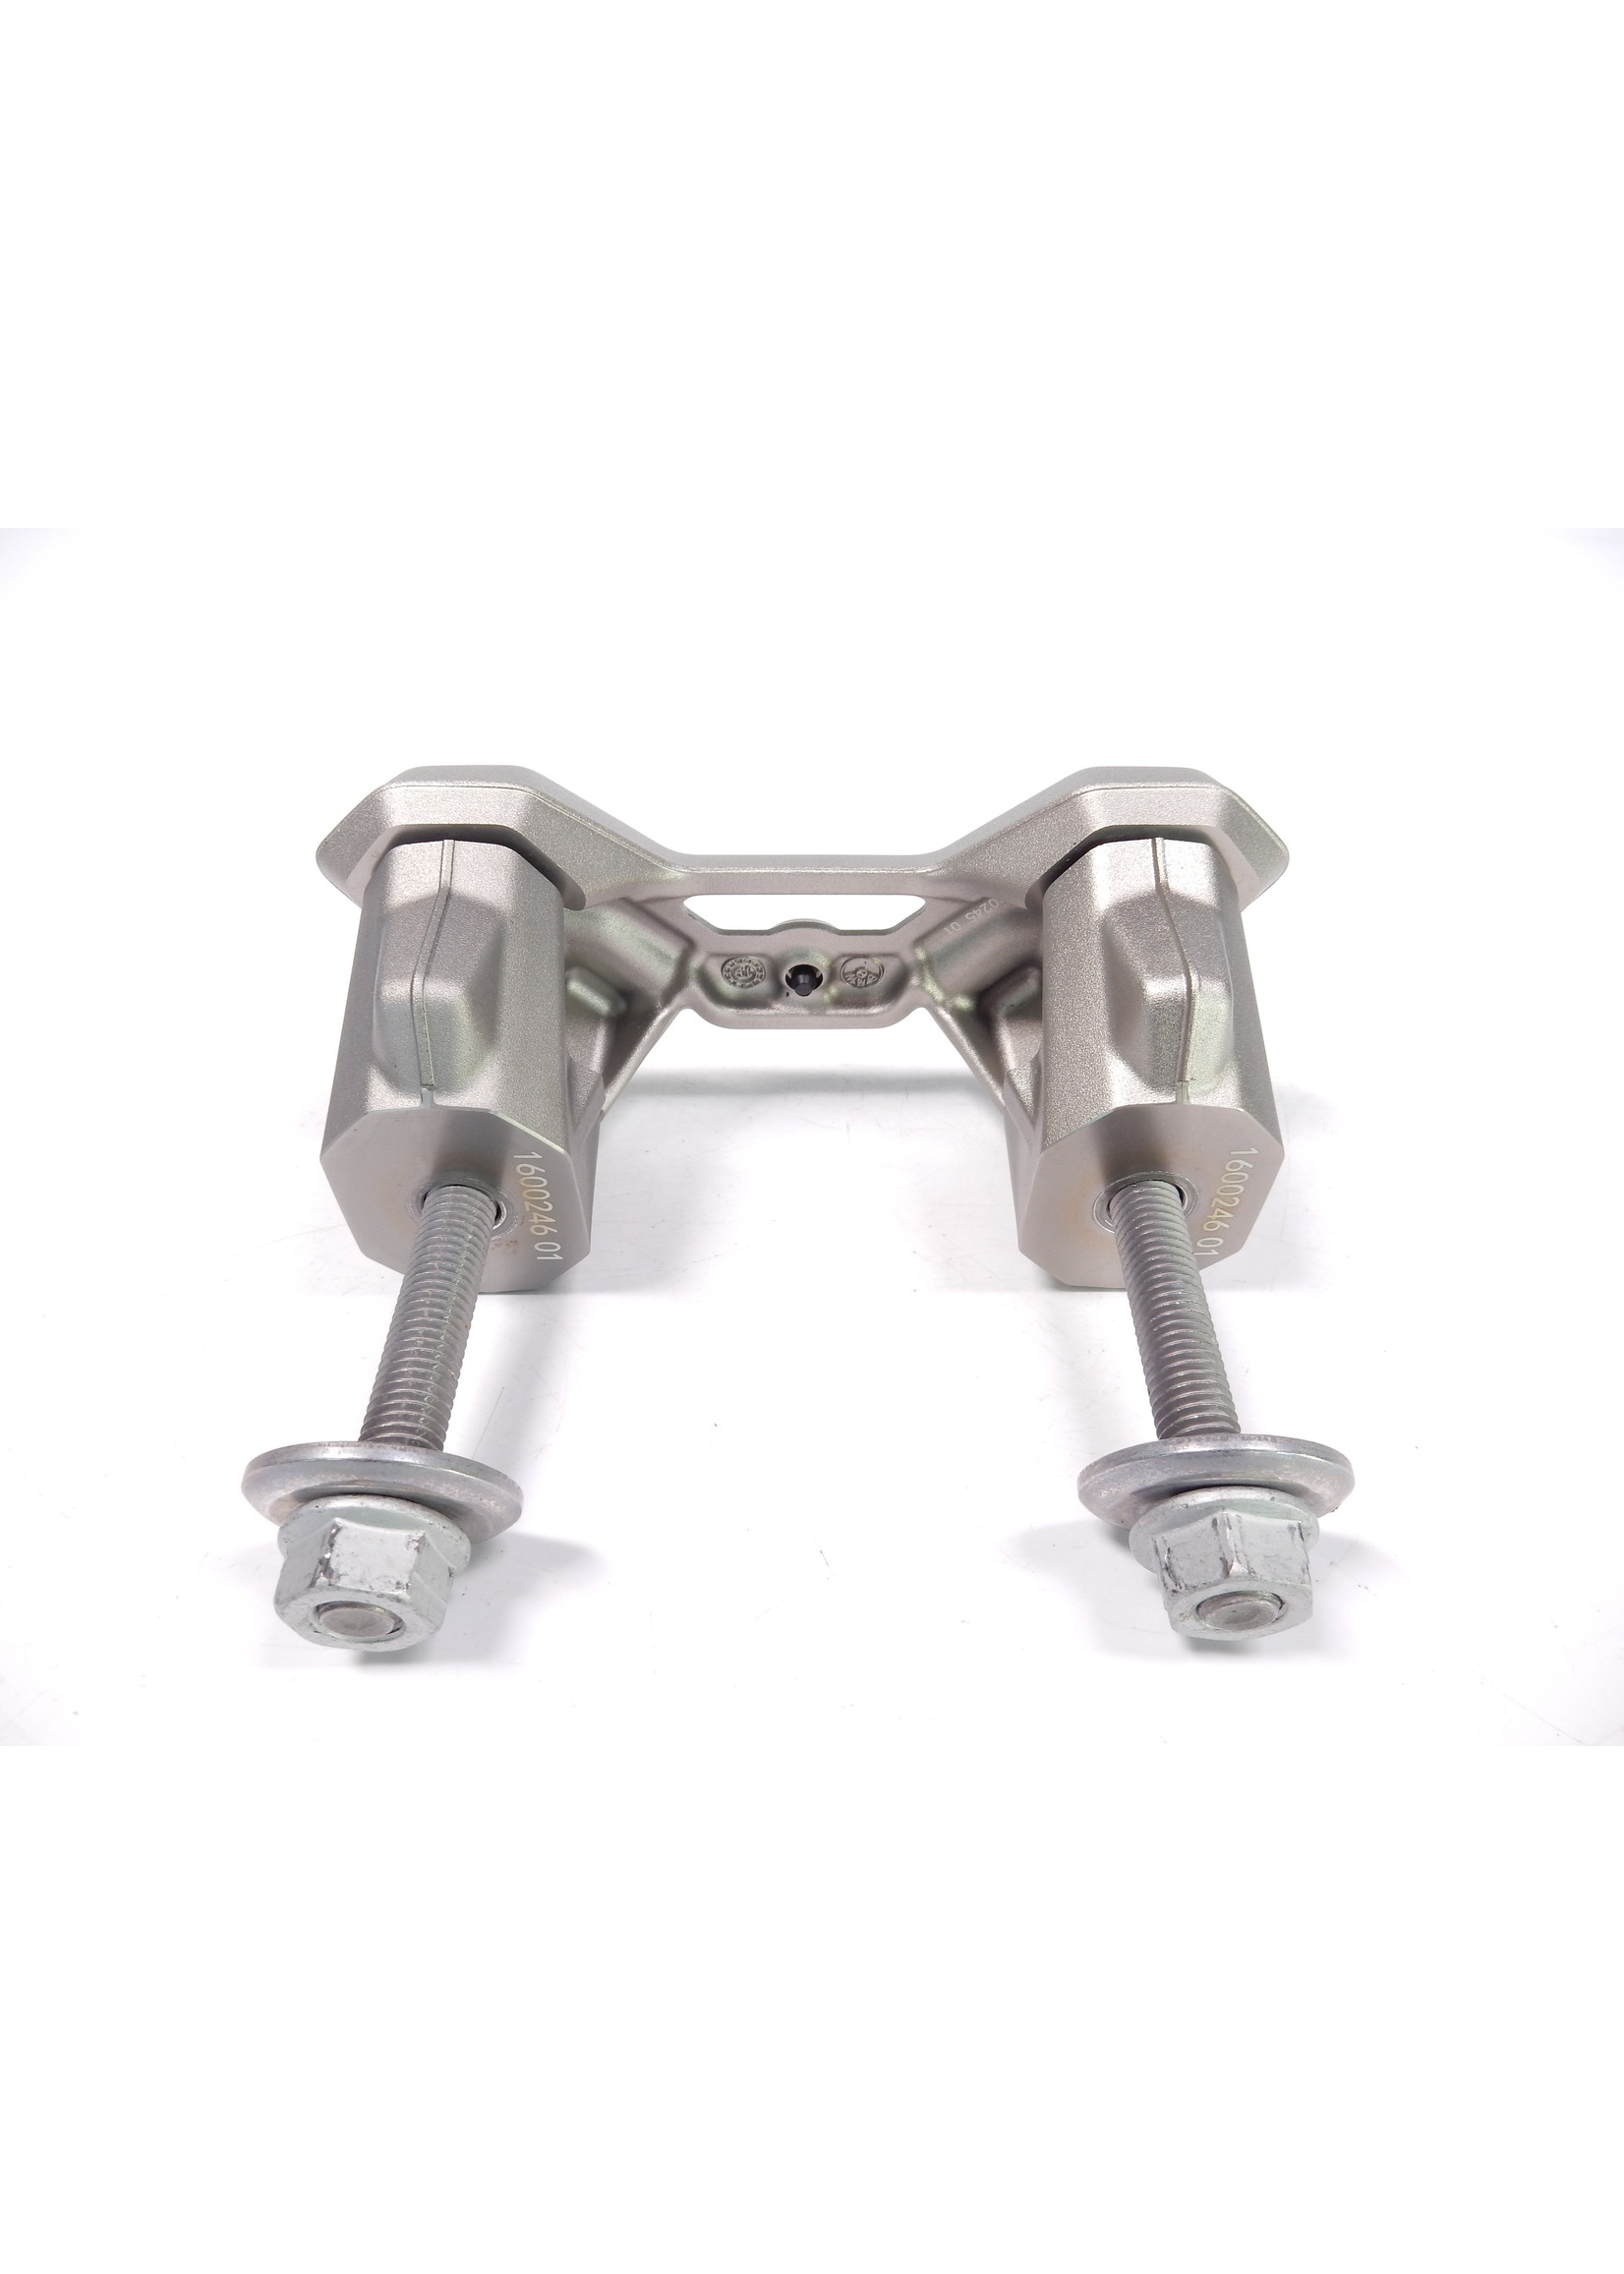 BMW BMW S 1000 R Clamping support, top / Clamping support, bottom / 31421600245 / 31421600246